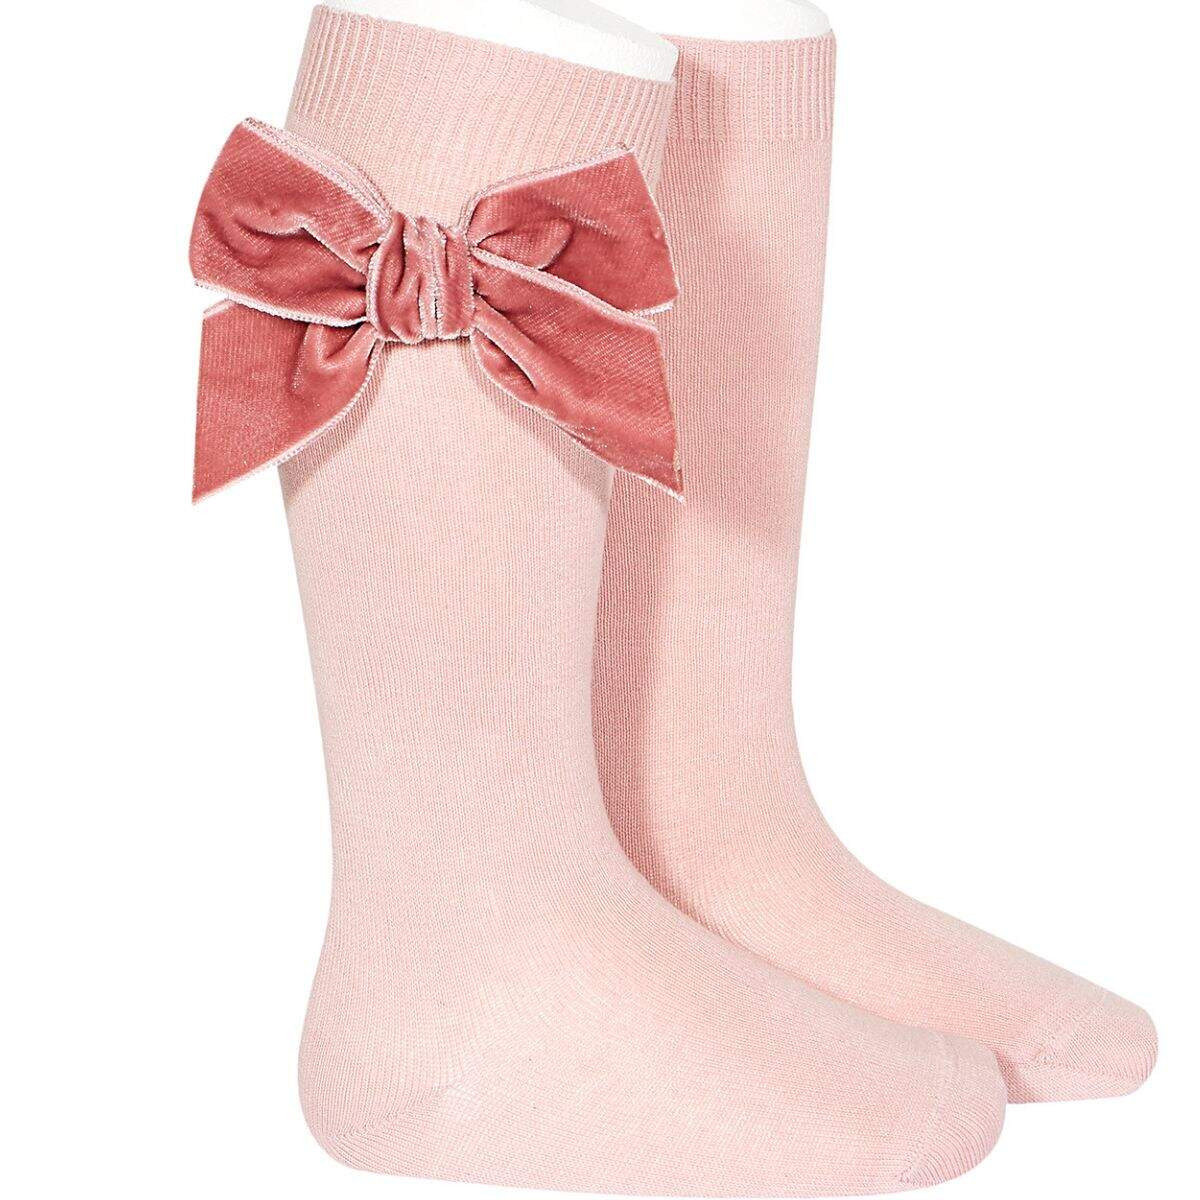 SOCKS WITH VELVET BOW 24892 PALE PINK 526 CONDOR - 1